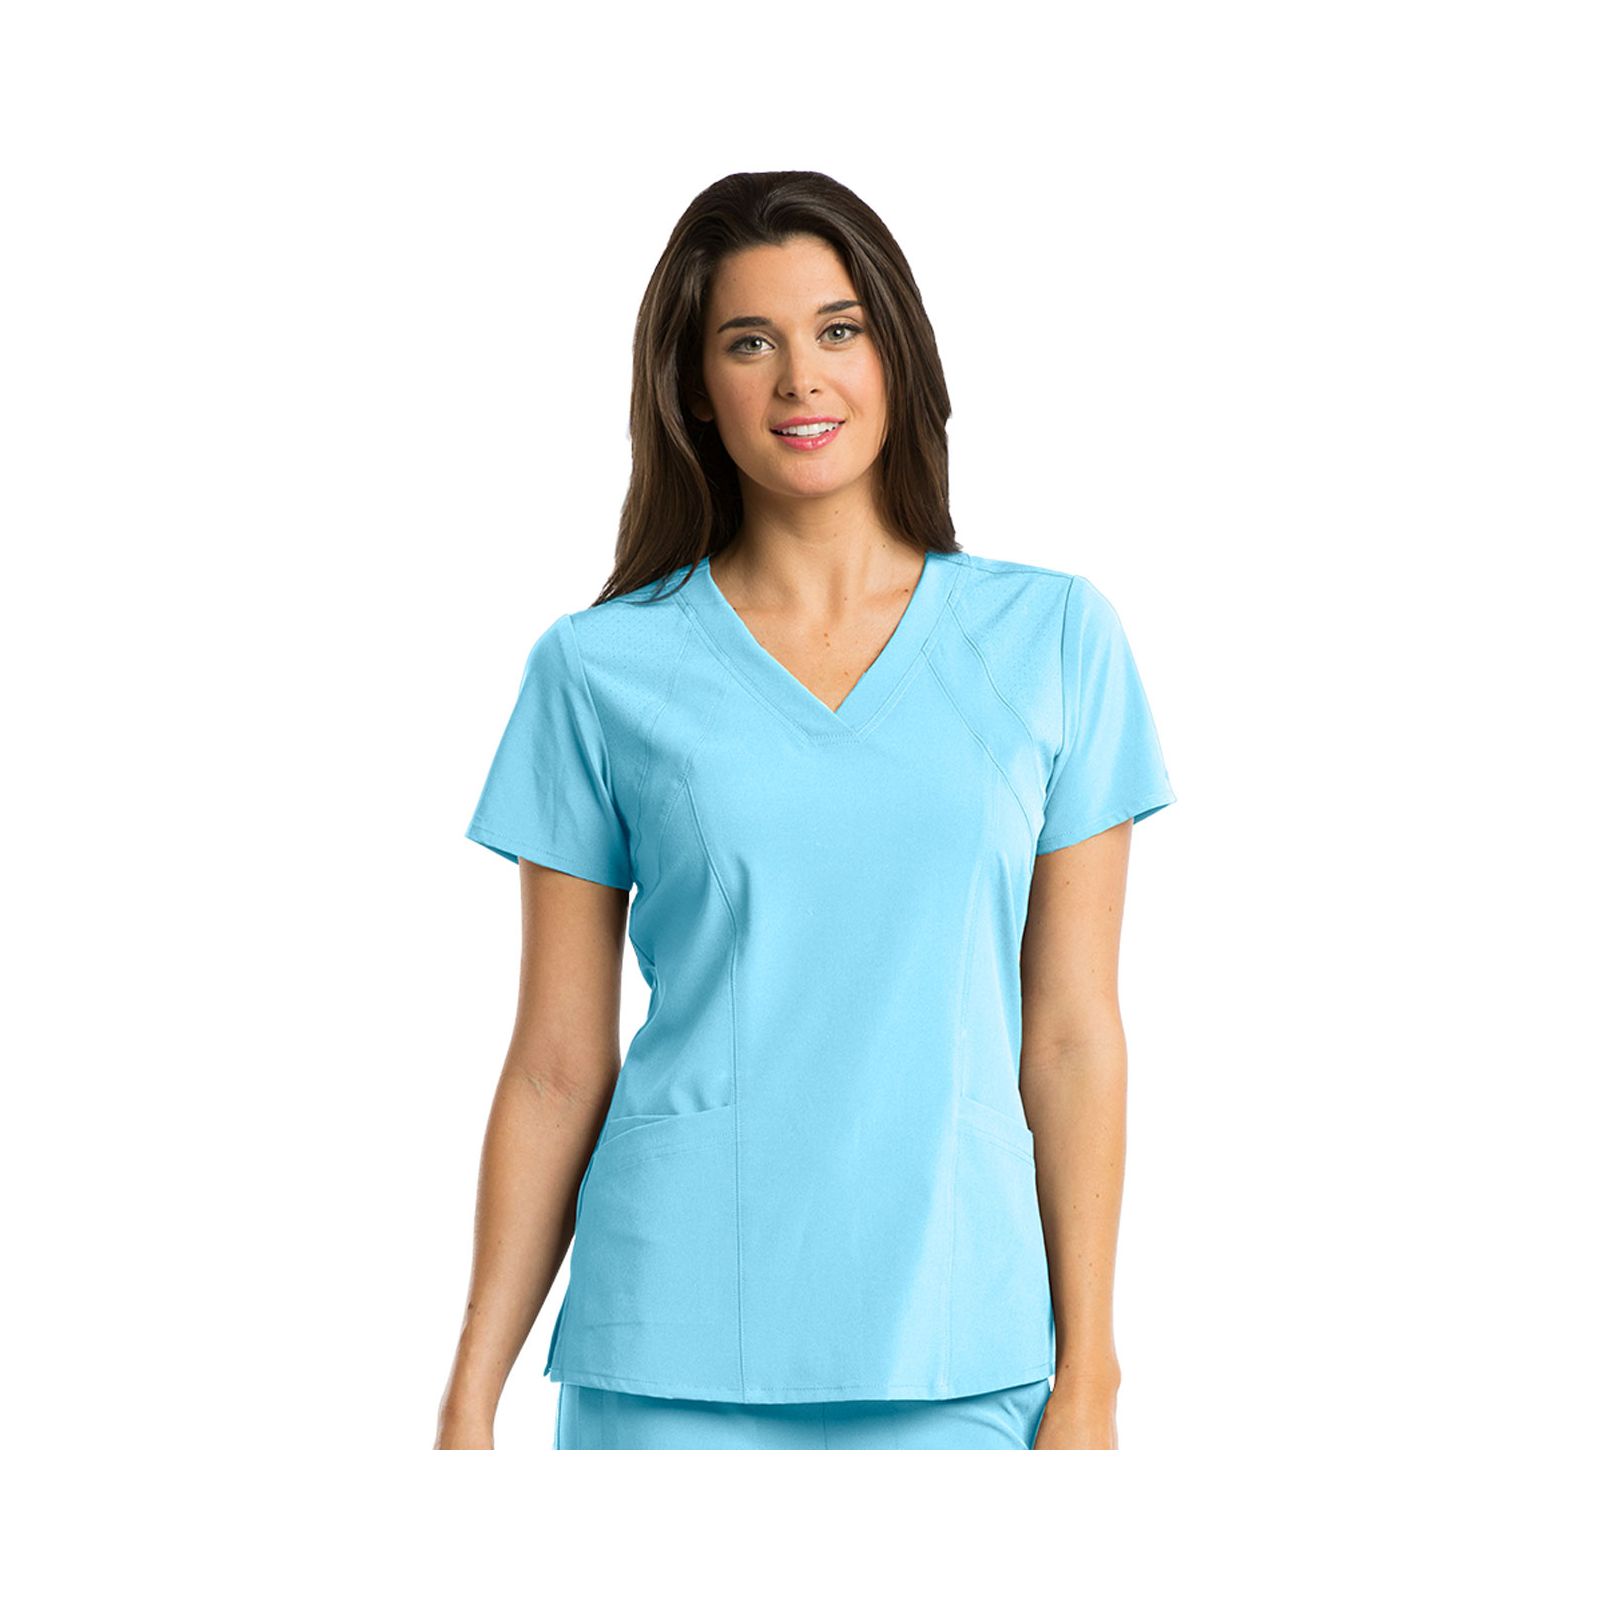 Blouse médicale femme, Barco One (5105) turquoise